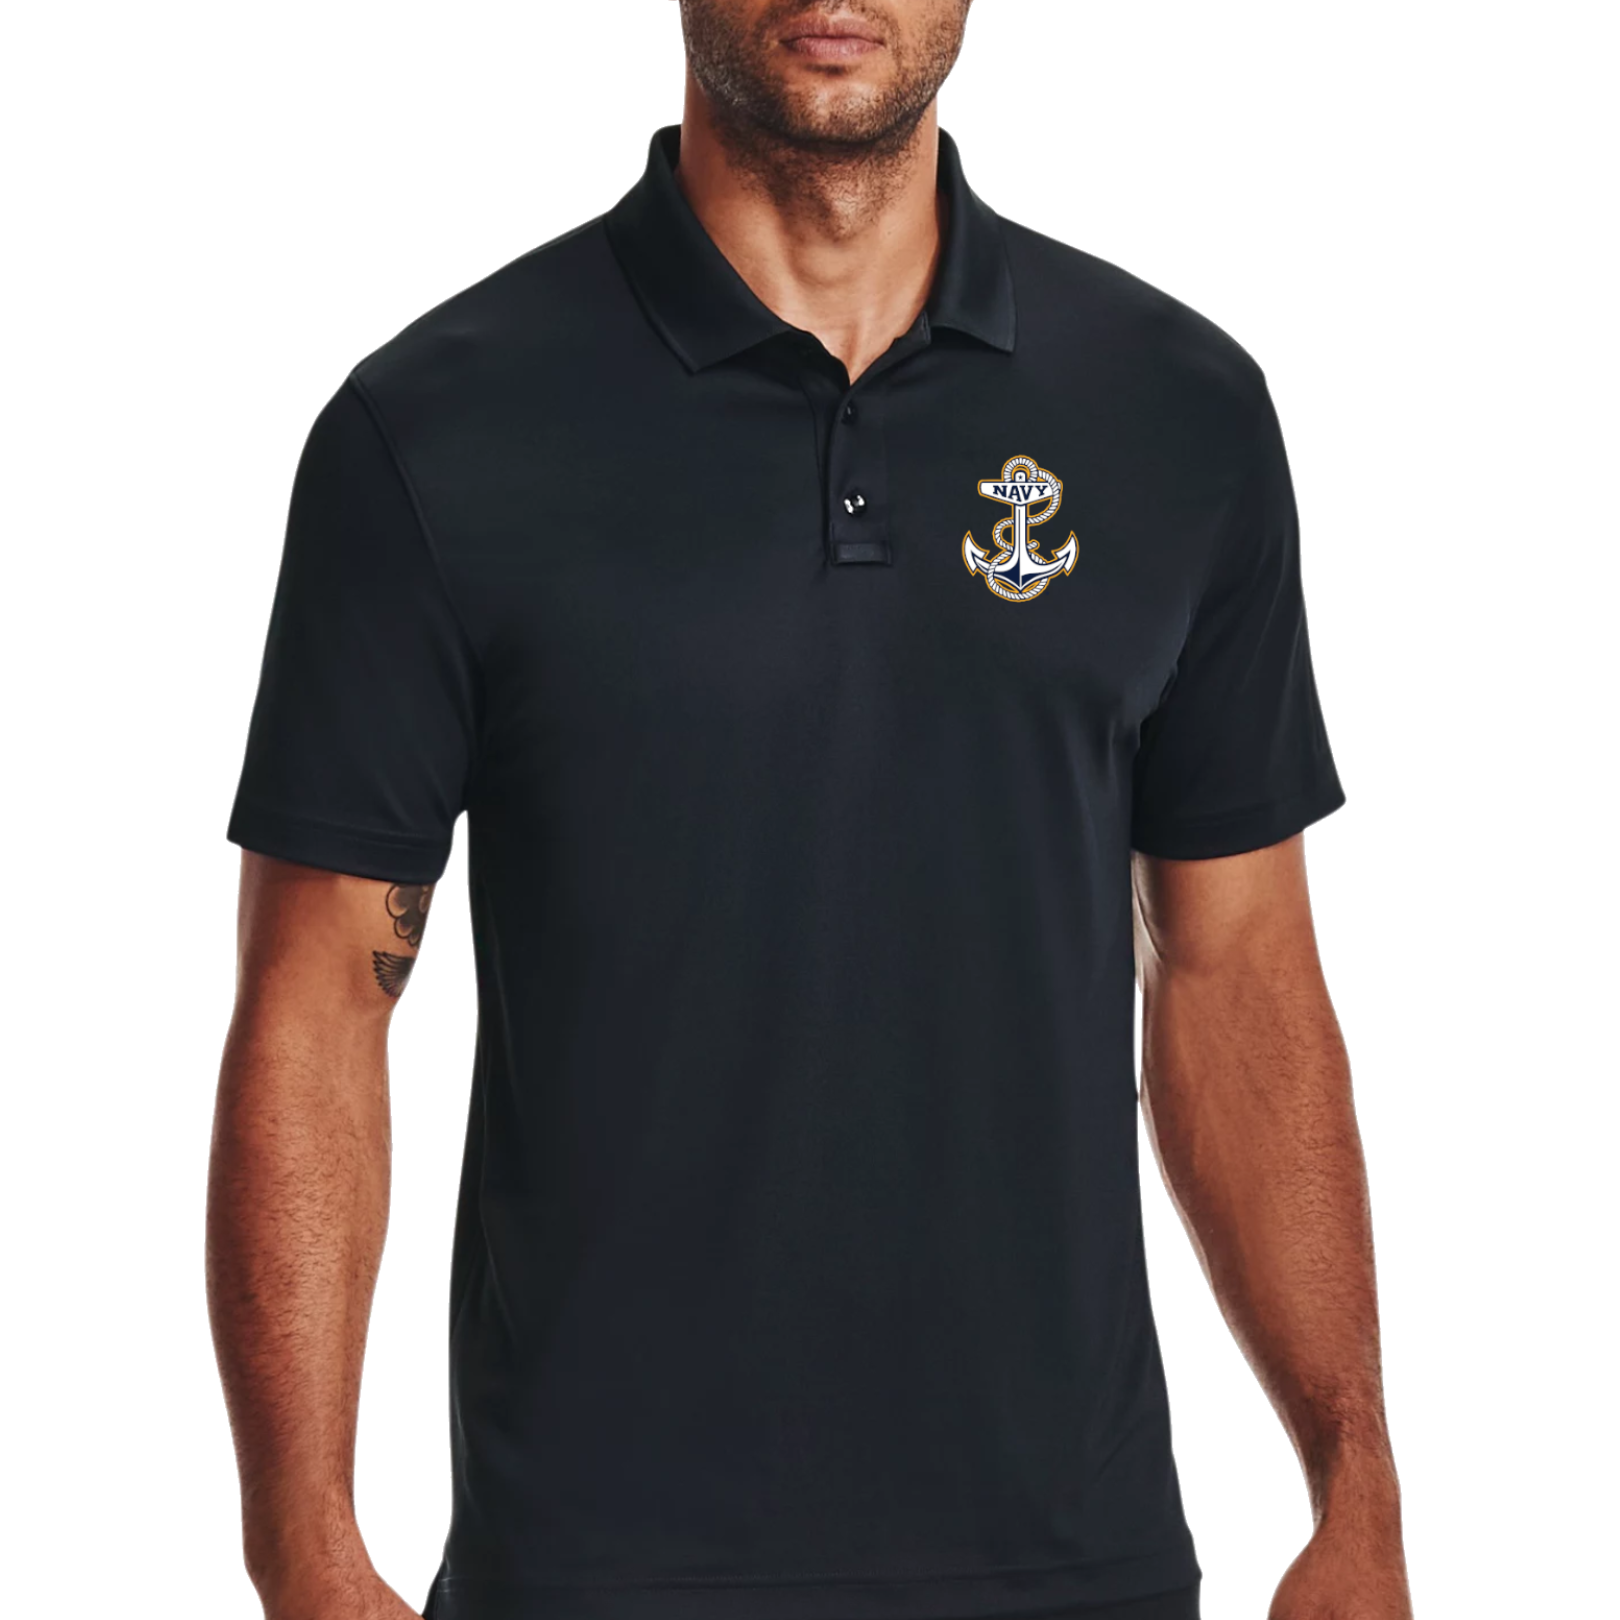 Navy Under Armour Tactical Performance Polo